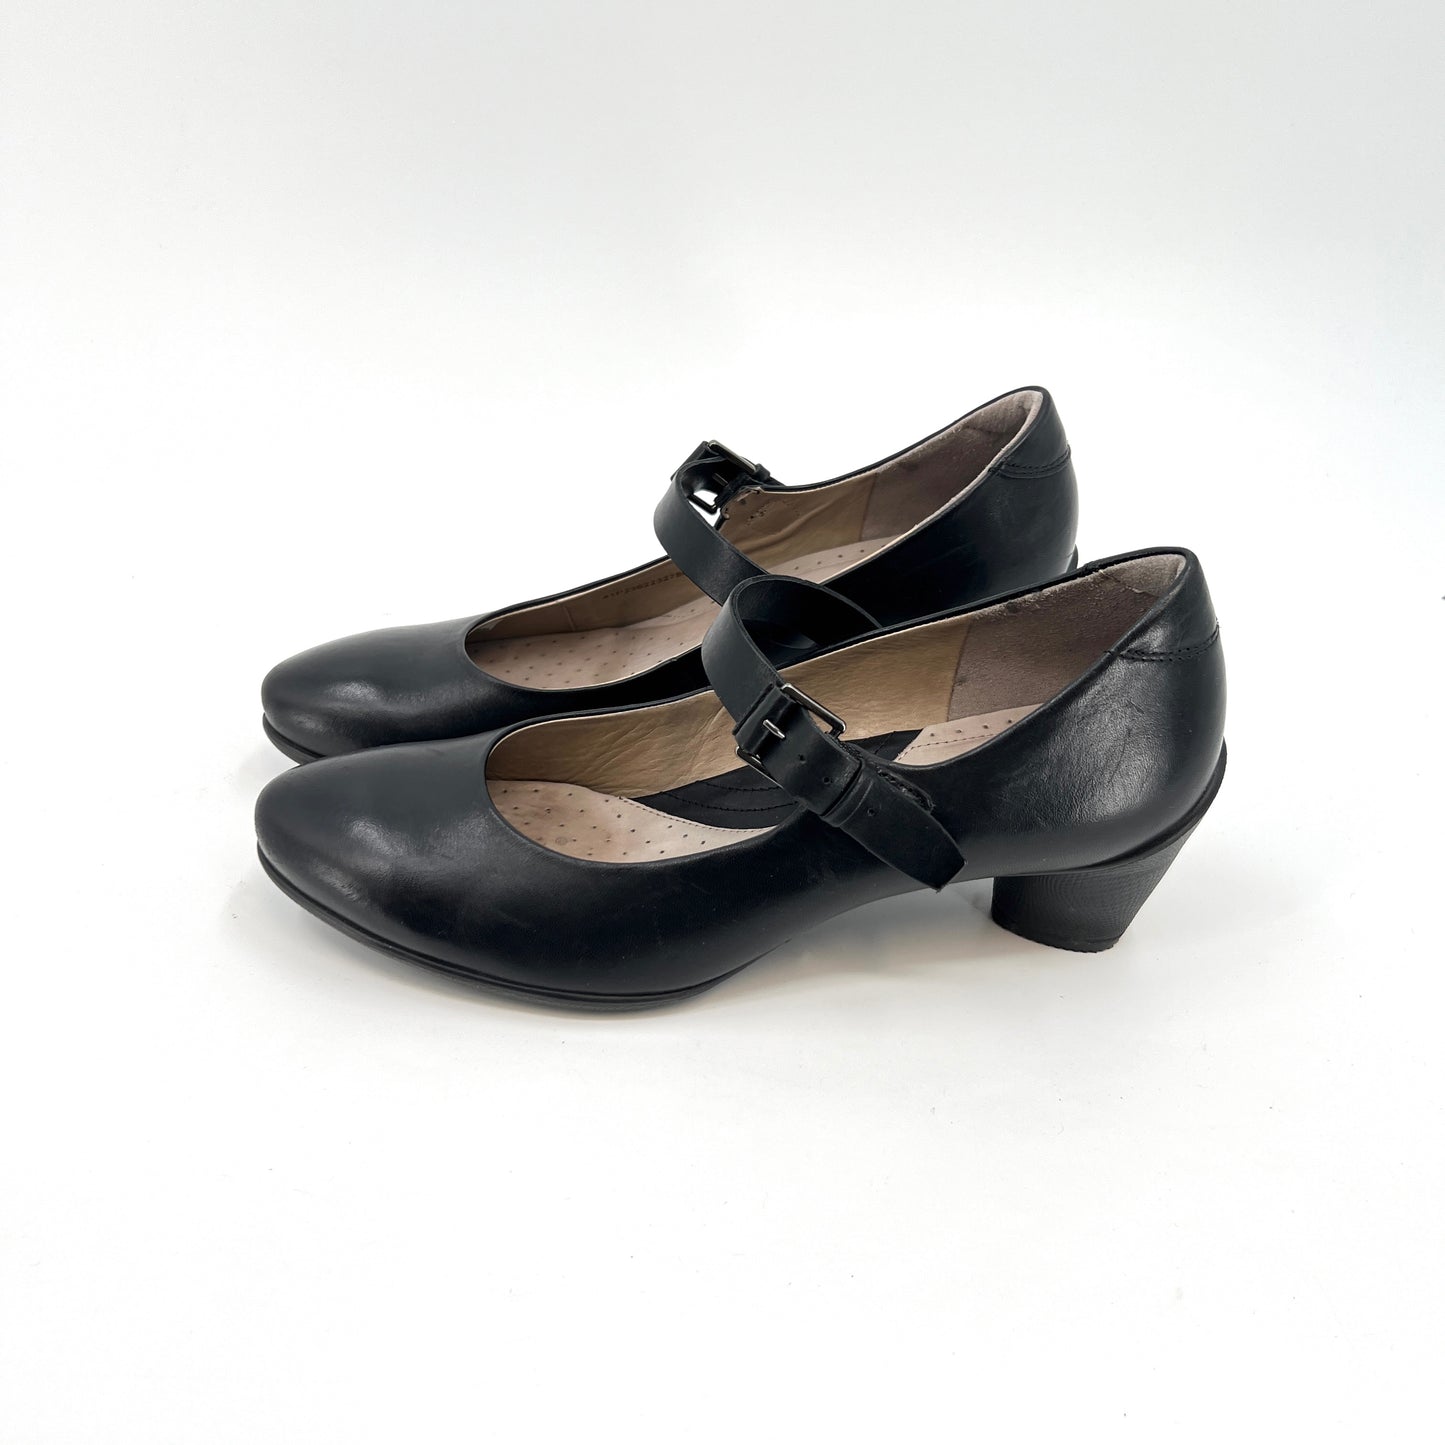 SOLD. Ecco Leather Mary Janes Shoes  41EU